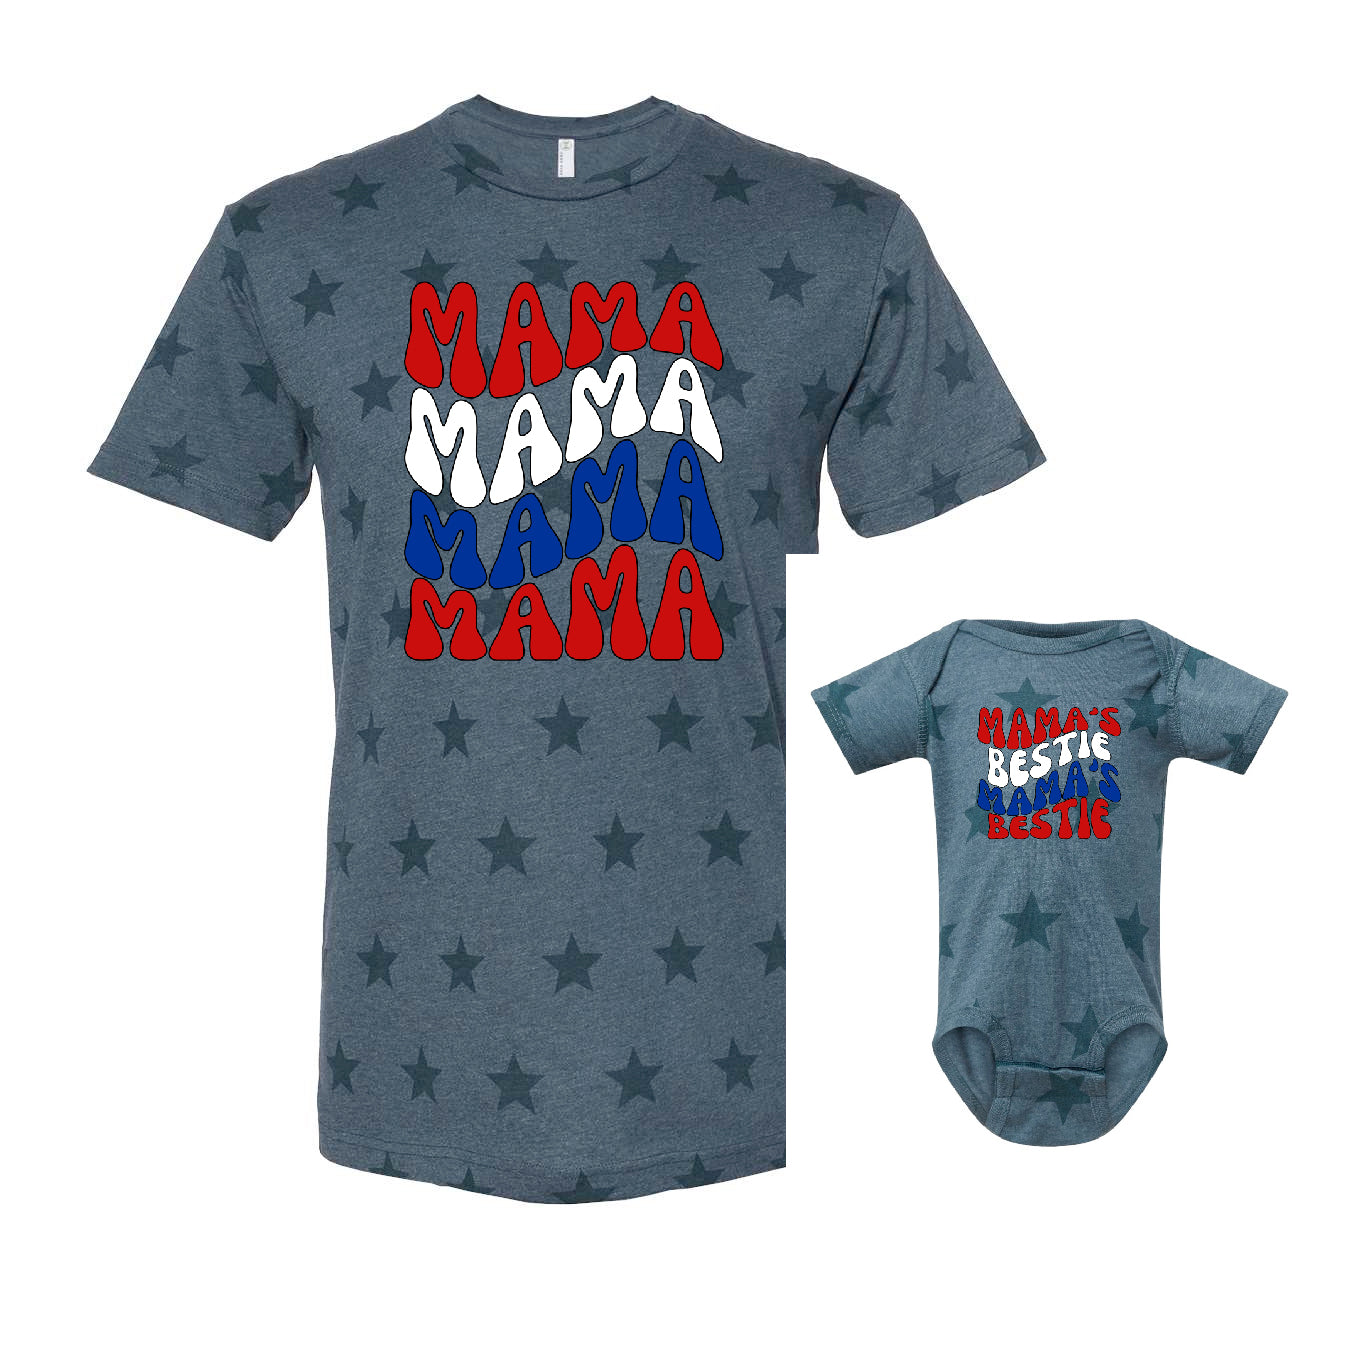 Mama's Bestie Red White and Blue Retro Wavy - with patterned tee options